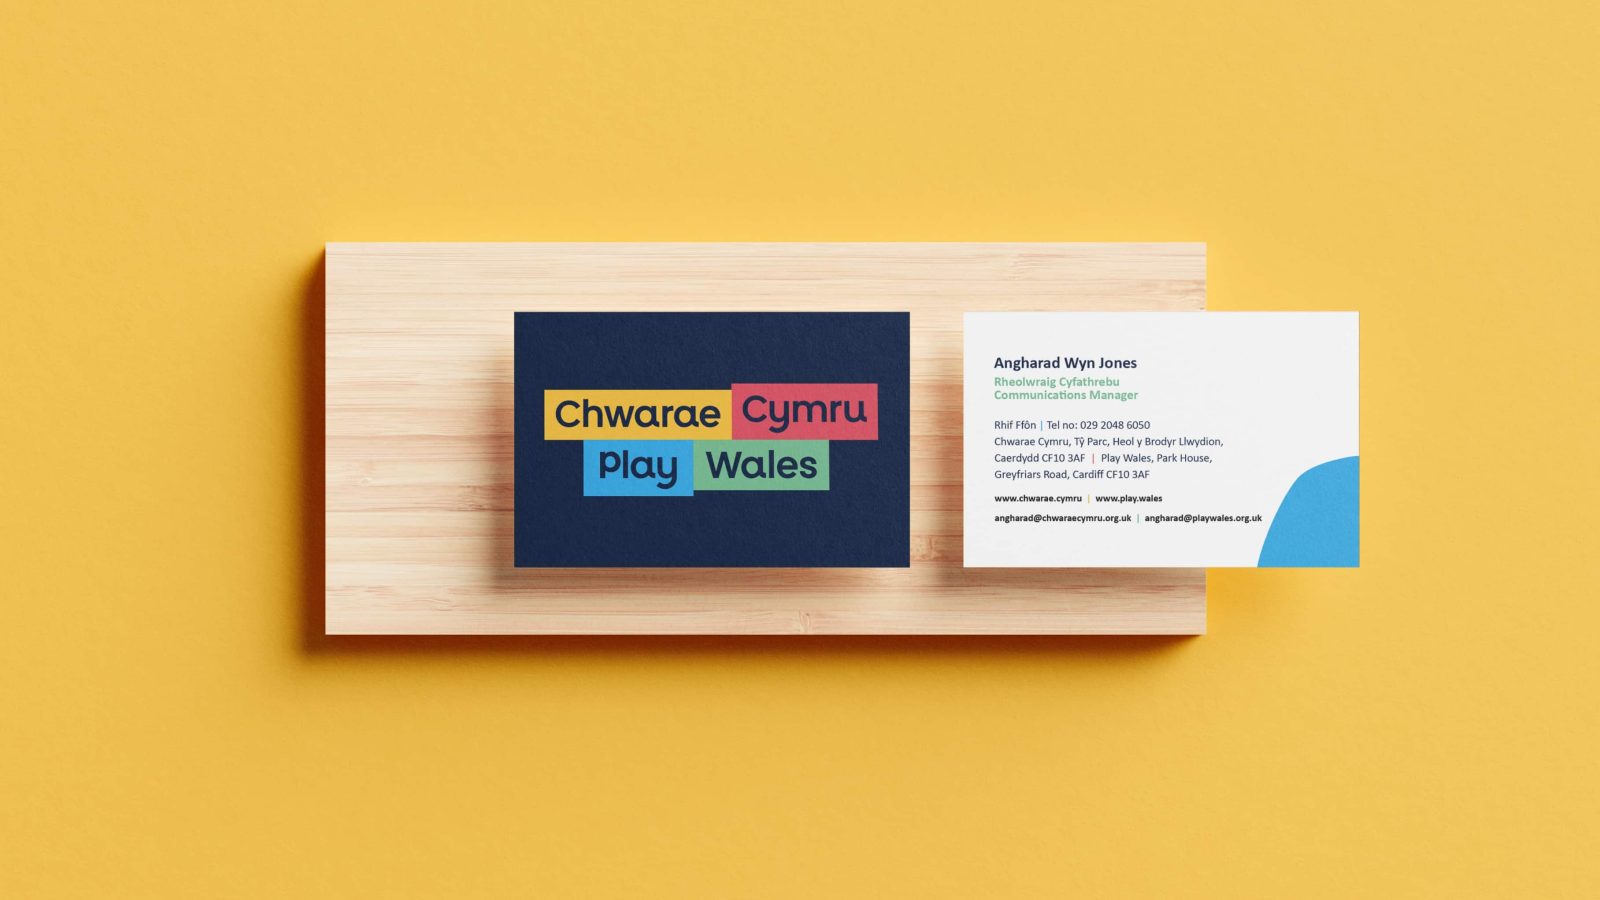 A business card designed by a Brand Agency in Cardiff displayed on a wooden holder against a yellow background. The card features a dark blue design with the logo 